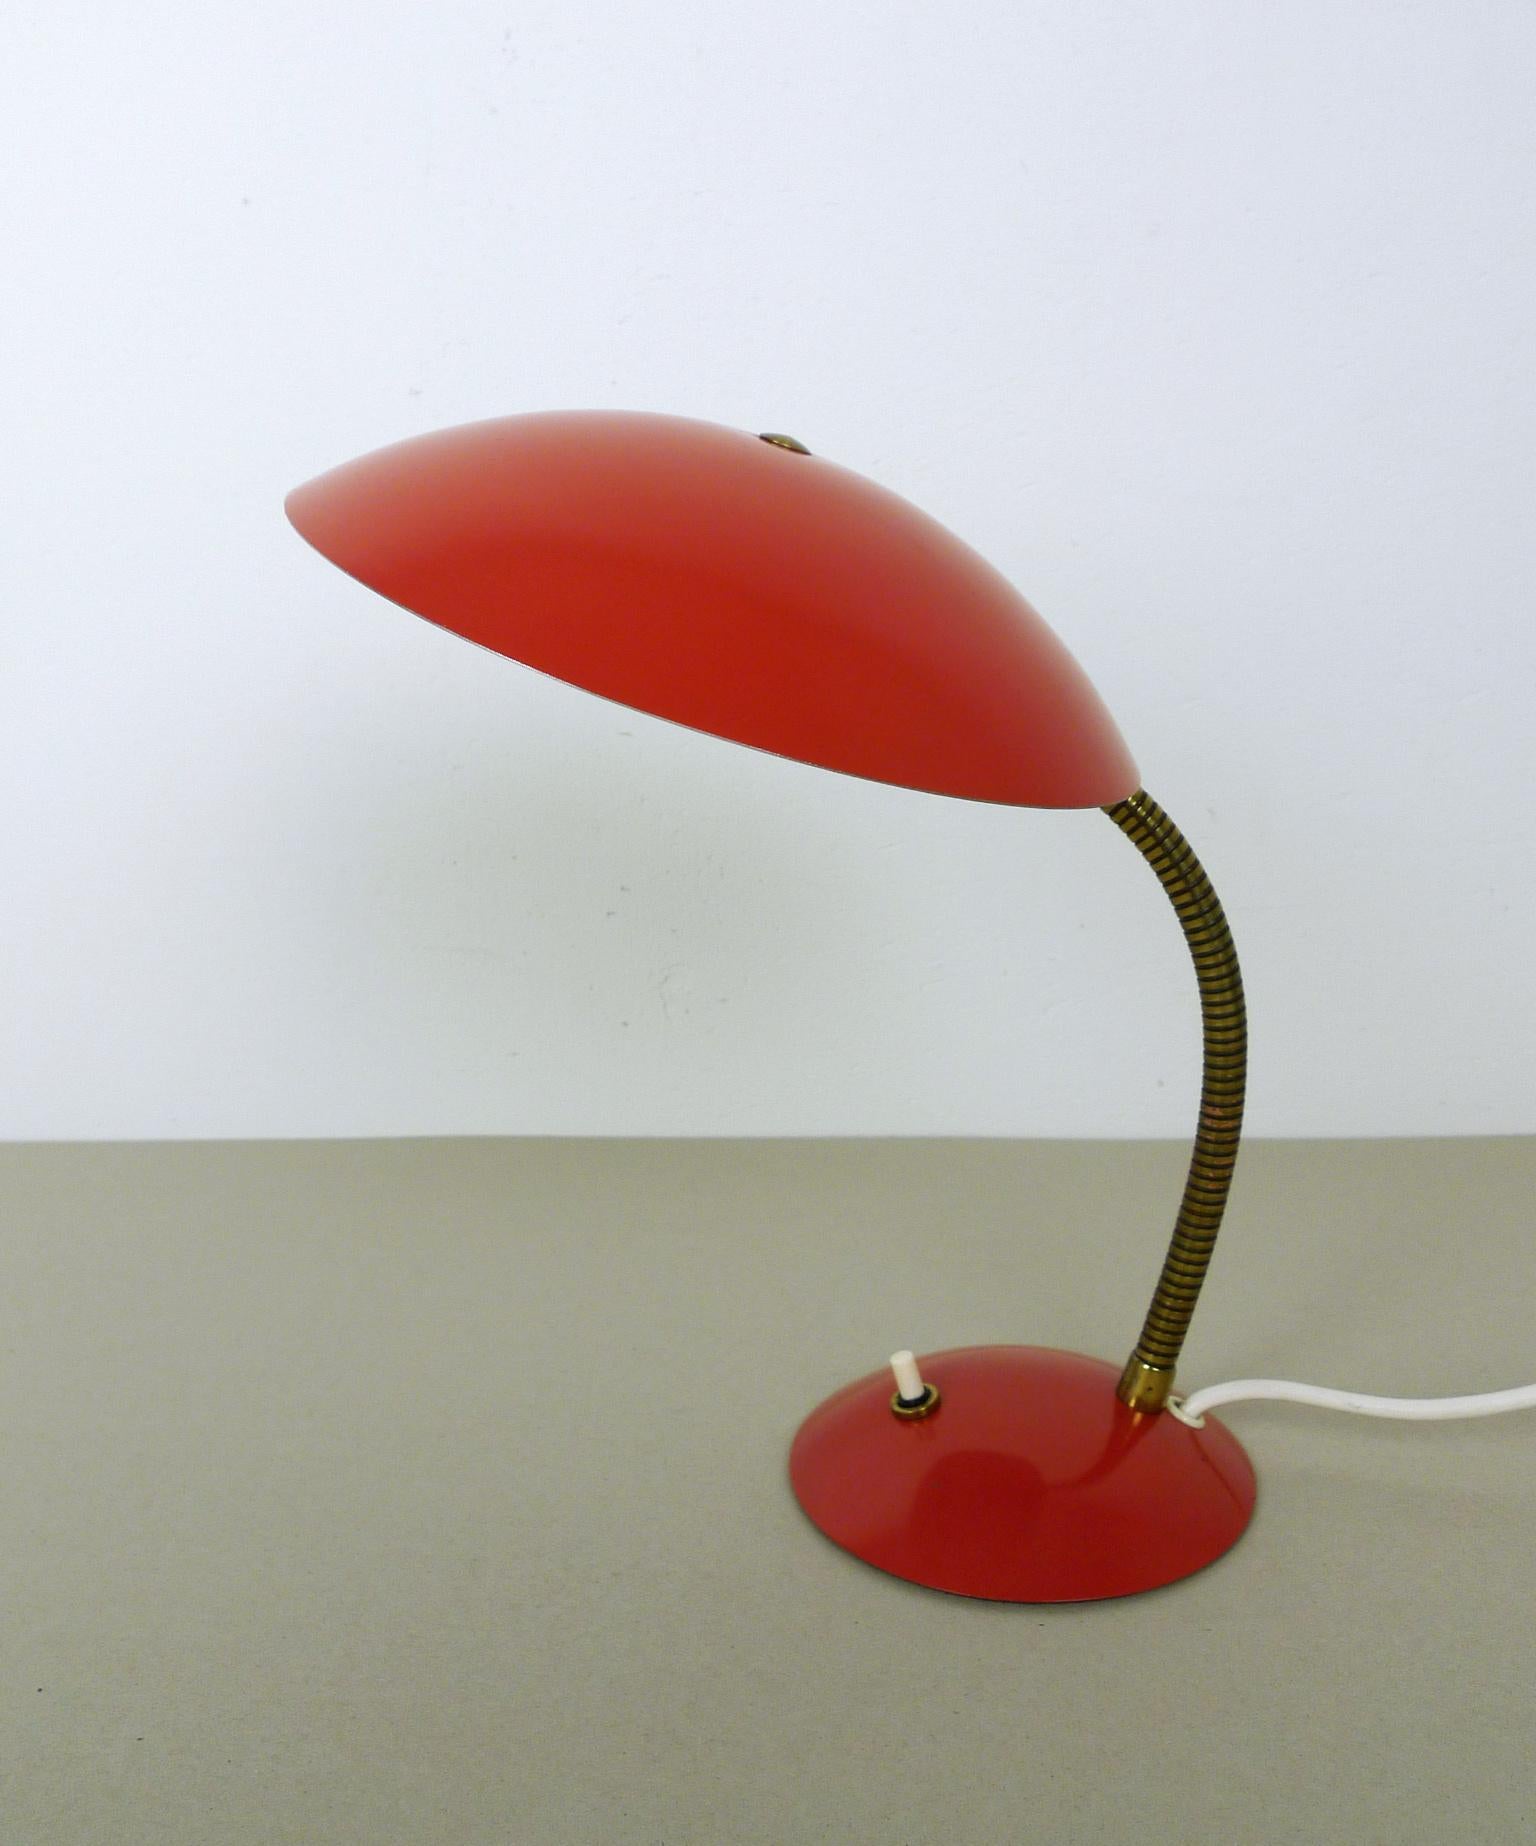 This small table lamp from the 1950s features a red lacquered shade and Stand with a brass gooseneck. It is operated by a pressure switch on the stand and has an E 14 lamp socket. The lamp is in very good condition.